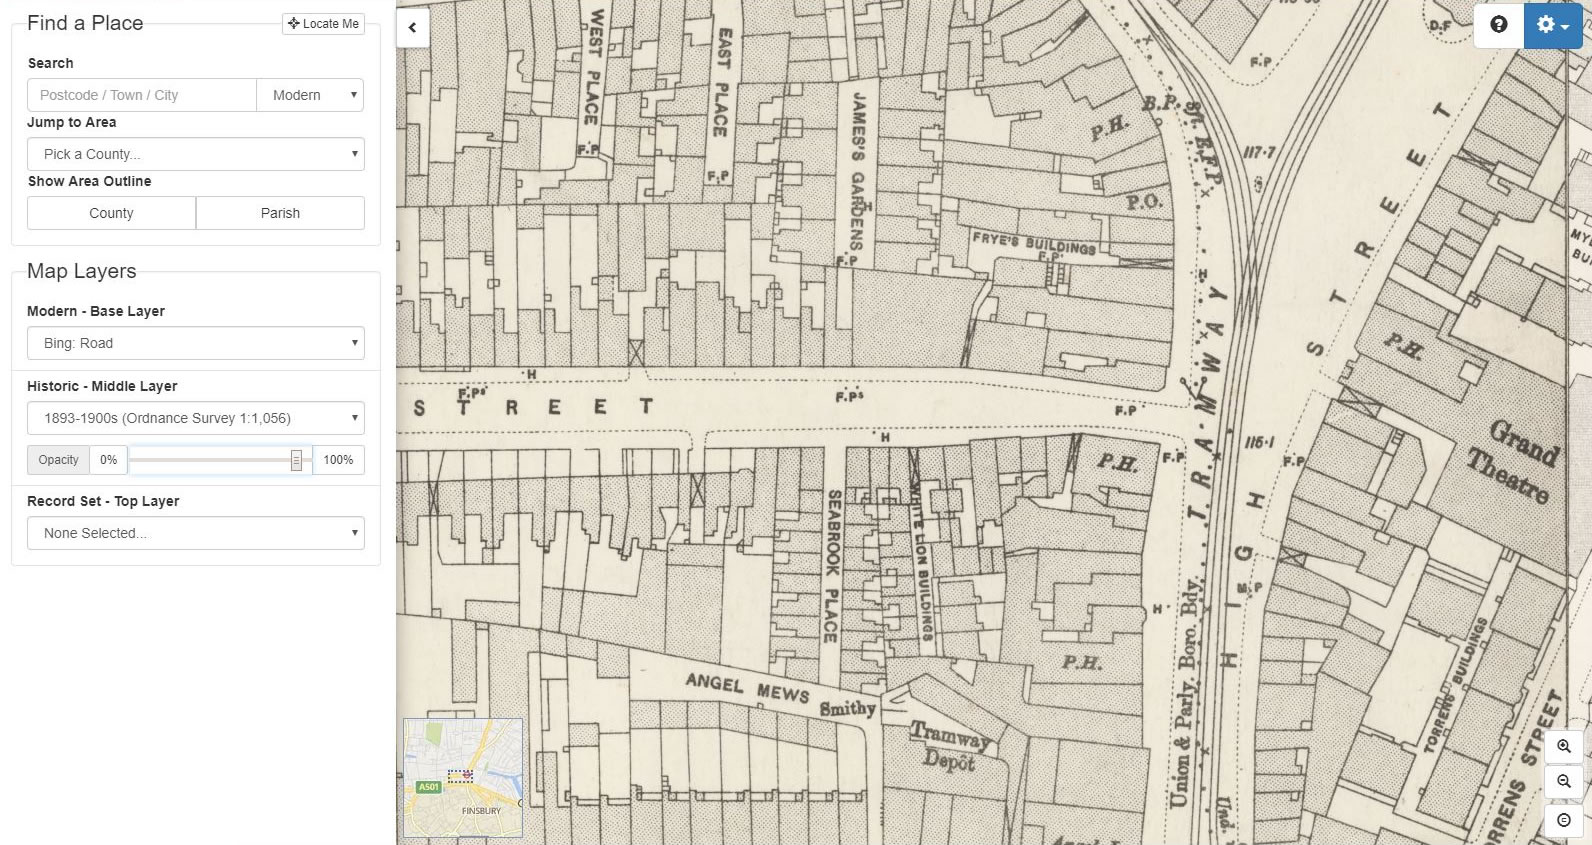 TheGenealogist's Map Explorer allows us to see the environment as mapped around the time when Kate's ancestors got married from the White Horse Public House in Clerkenwell